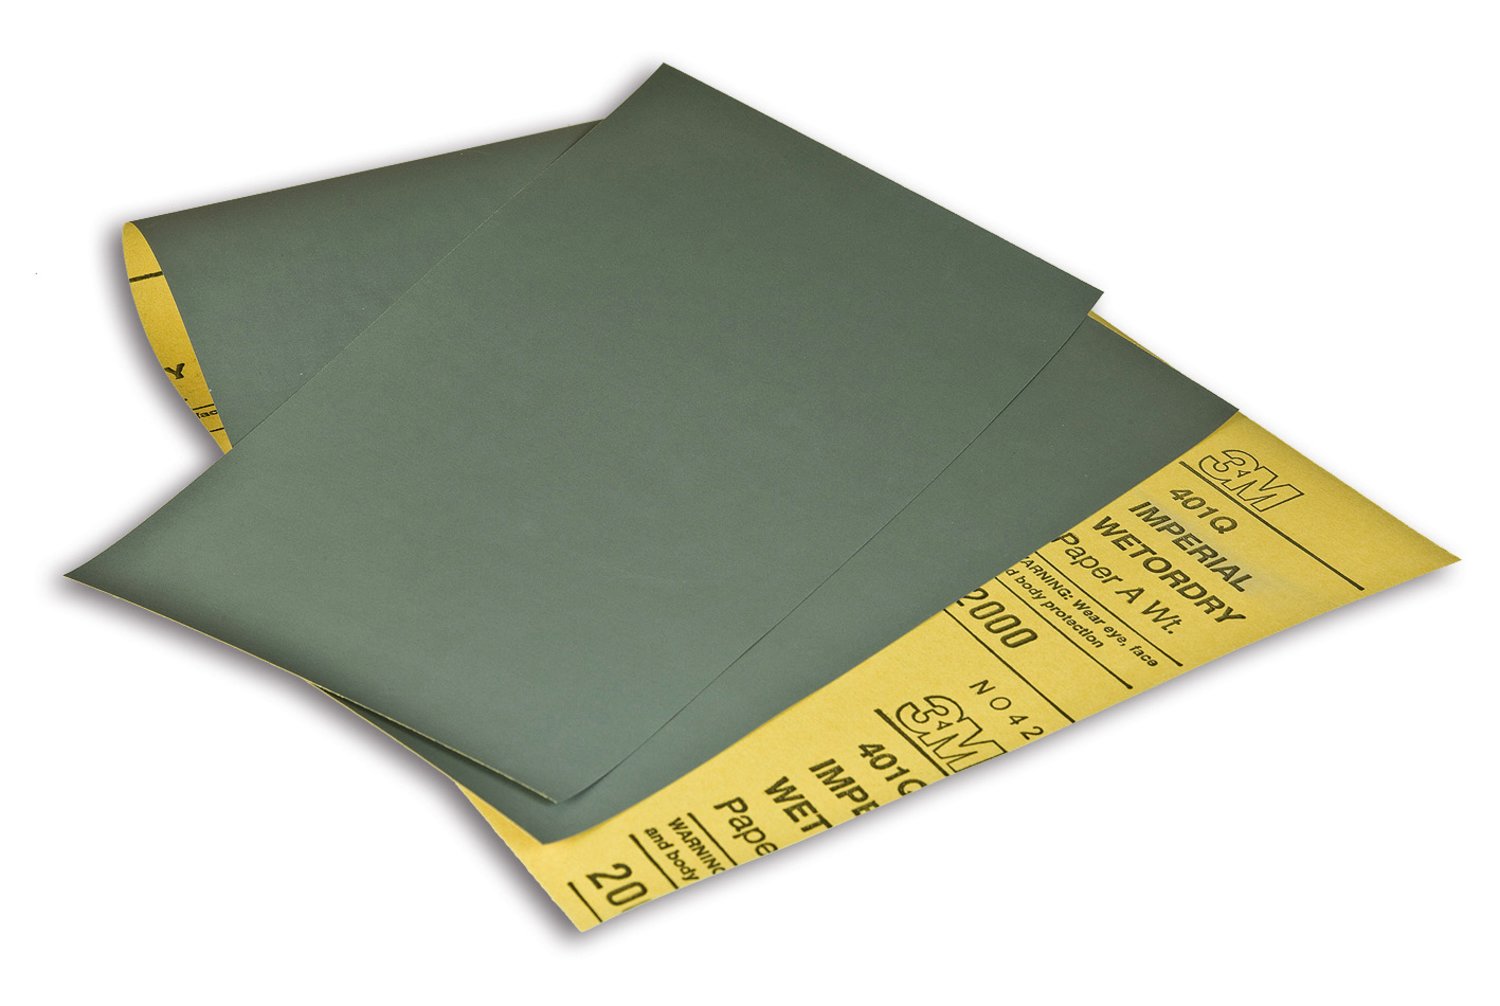 7100193662 - 3M Hookit Wetordry Paper Sheet 401Q, 2000 A-weight, 4-1/2 in x 5-1/2
in